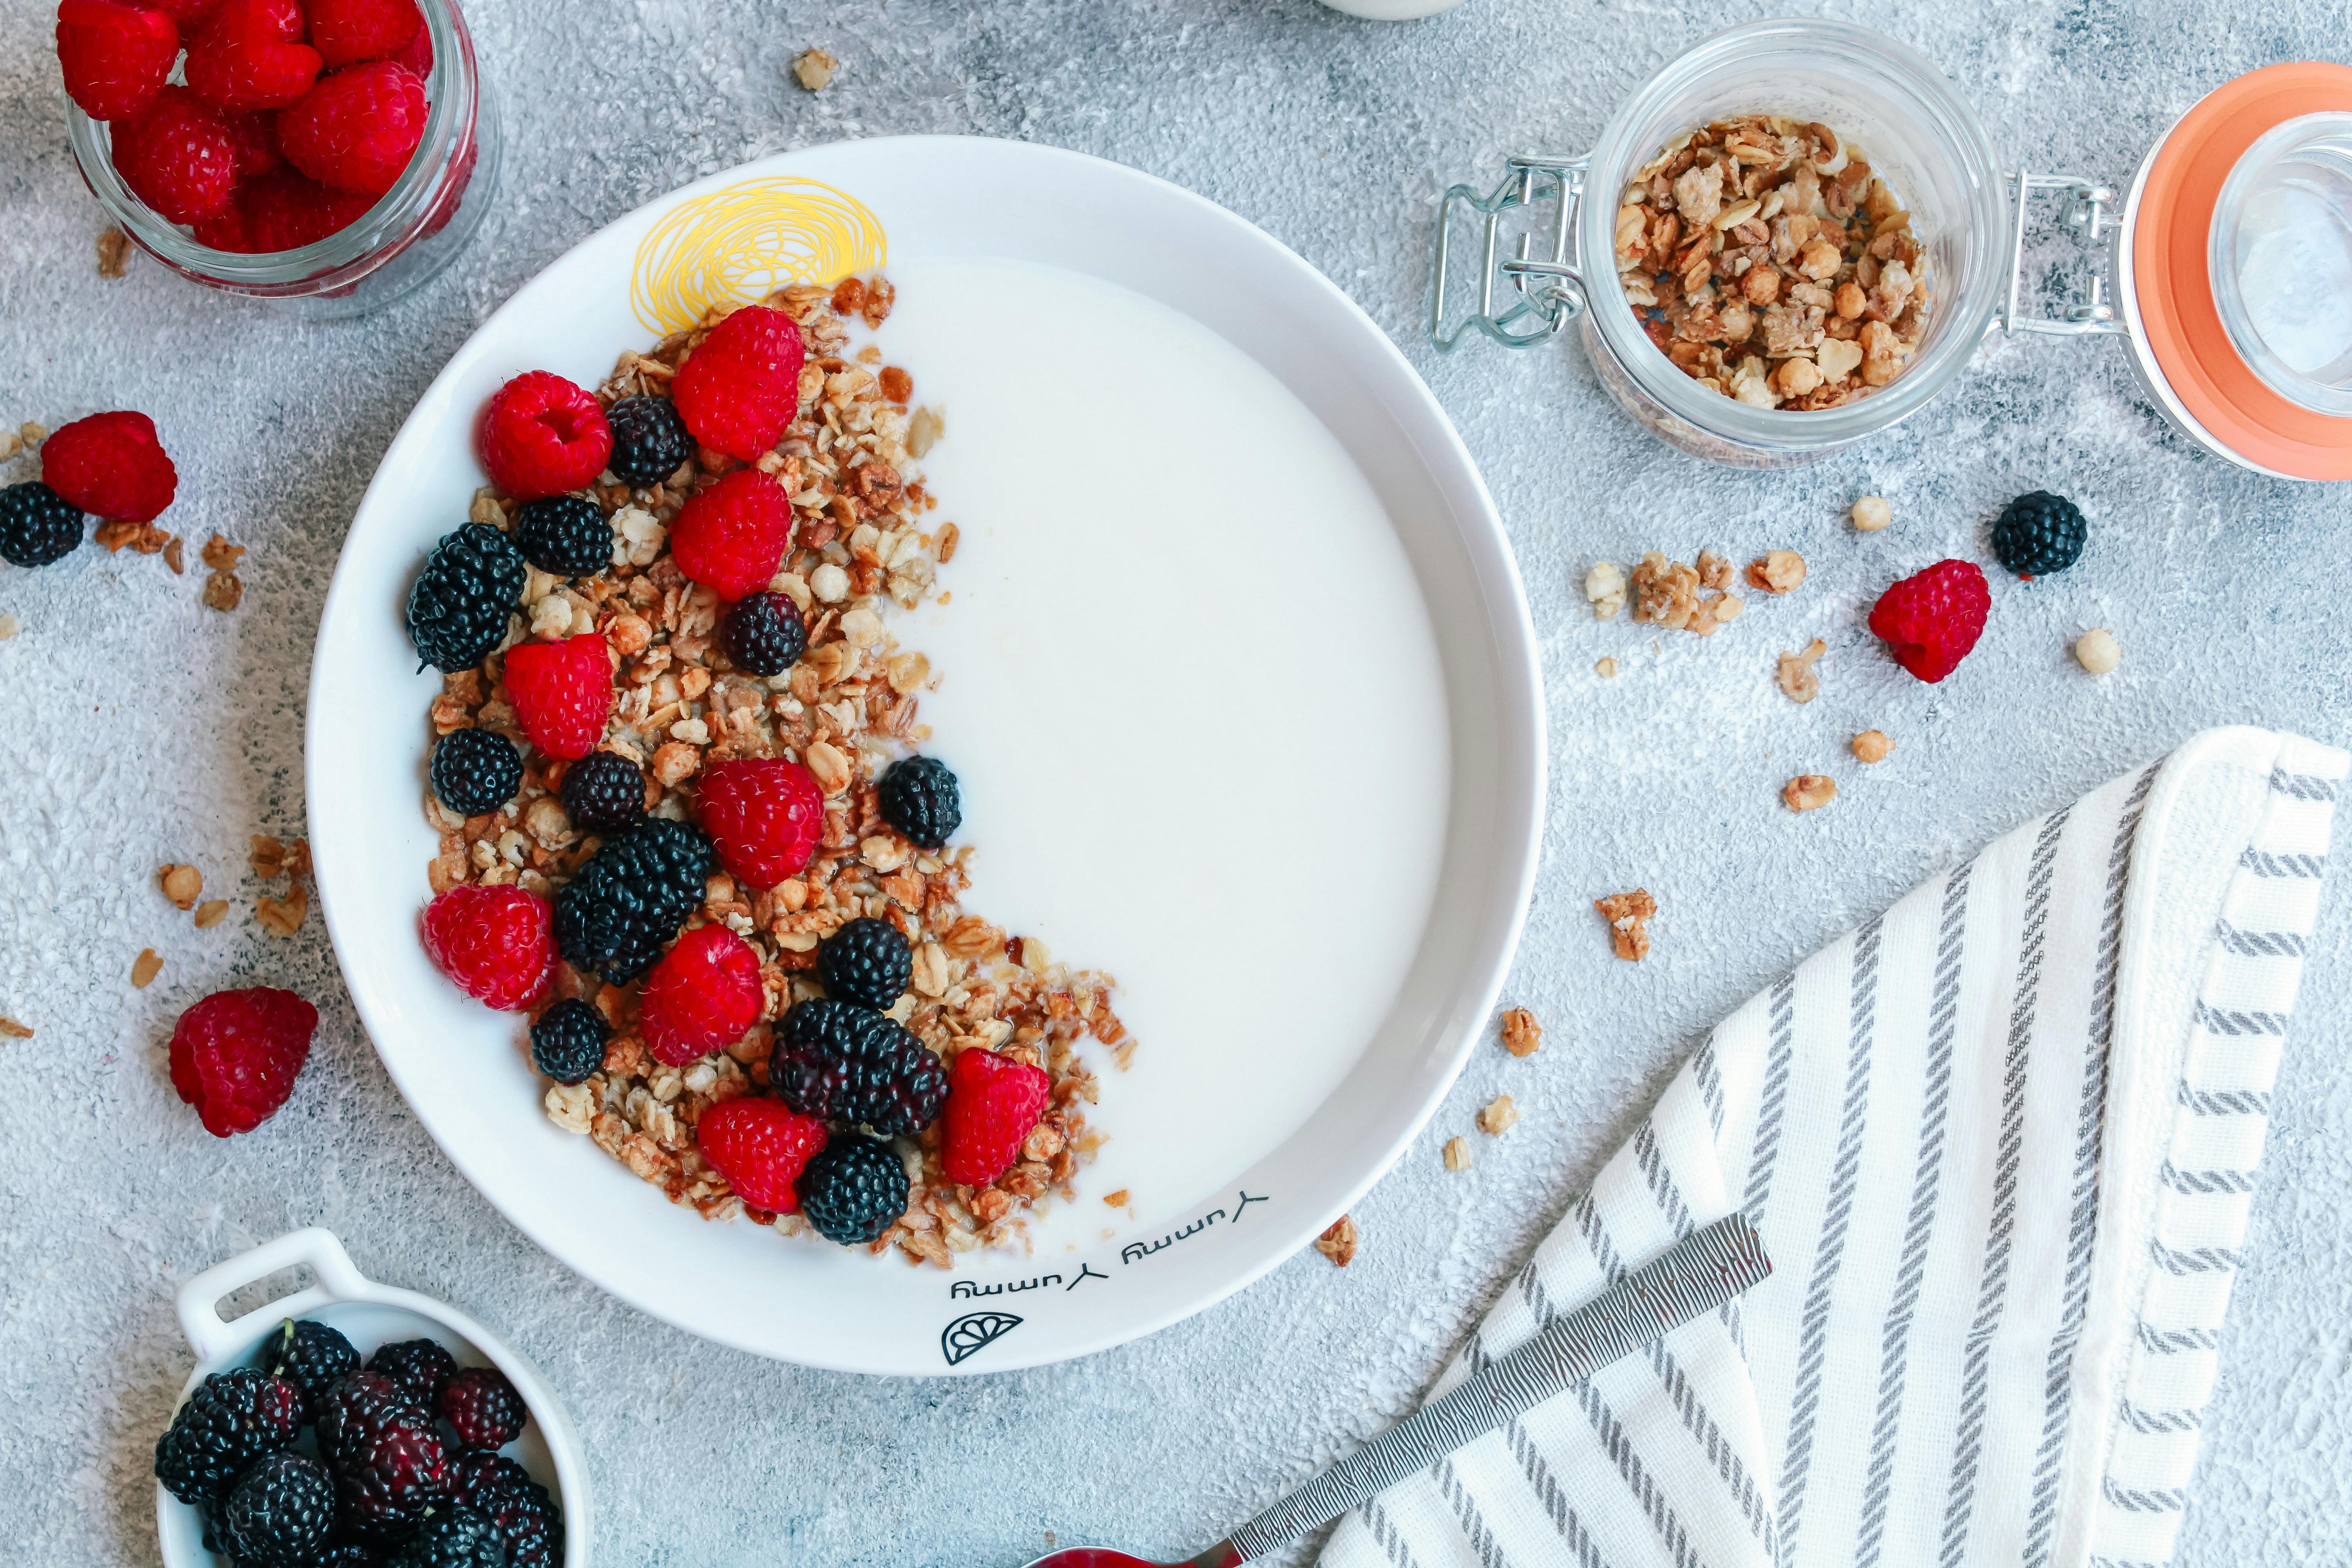 Wholegrain cereal and fruit with yoghurt bowl